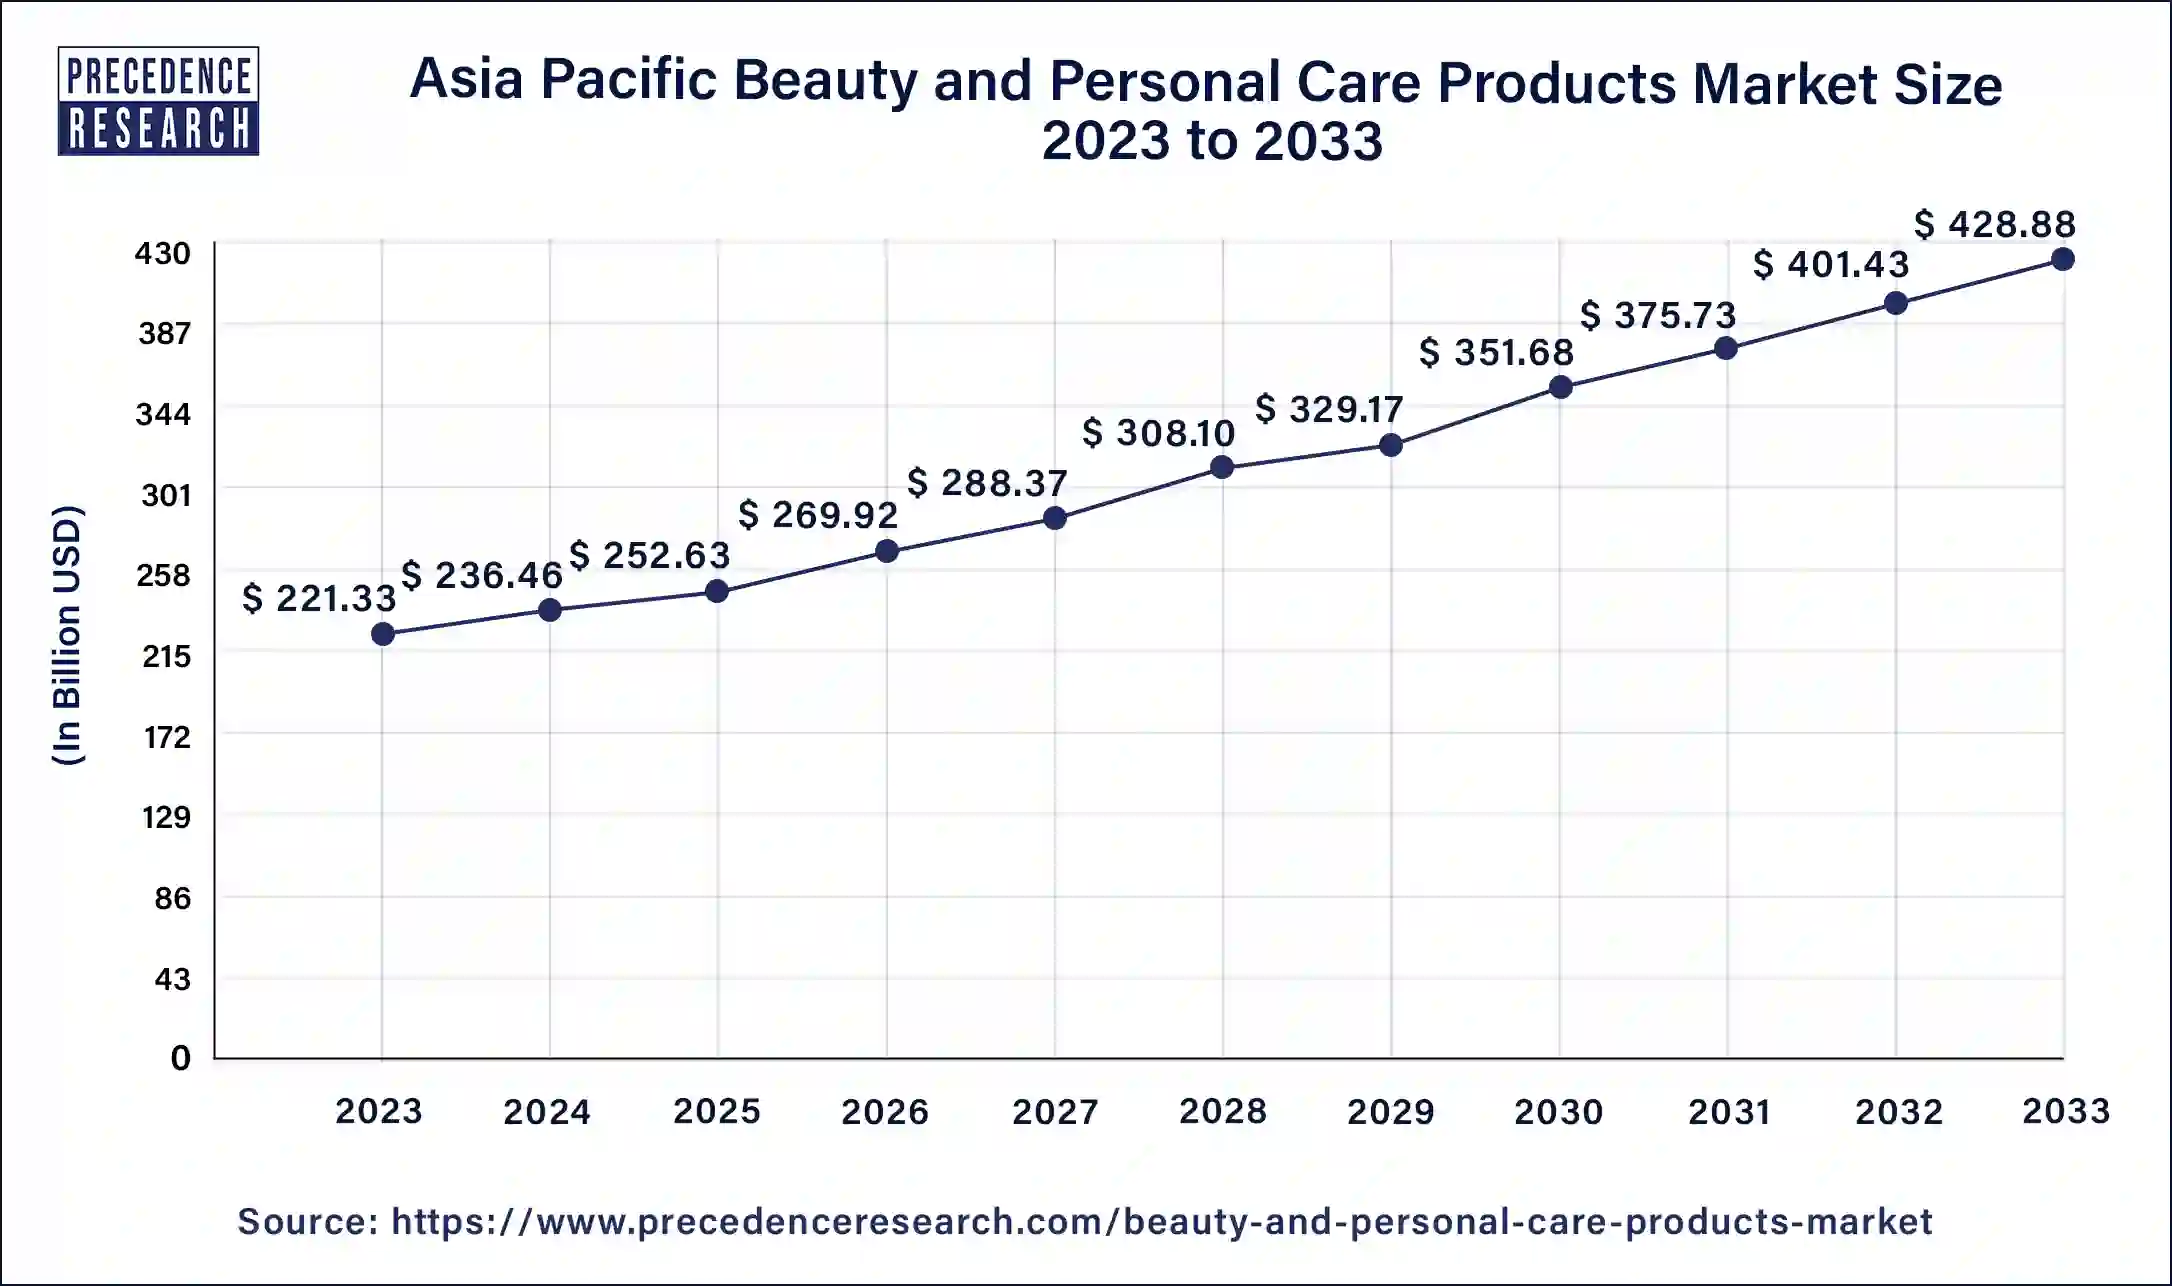 sia Pacific Beauty and Personal Care Products Market Size 2024 to 2033